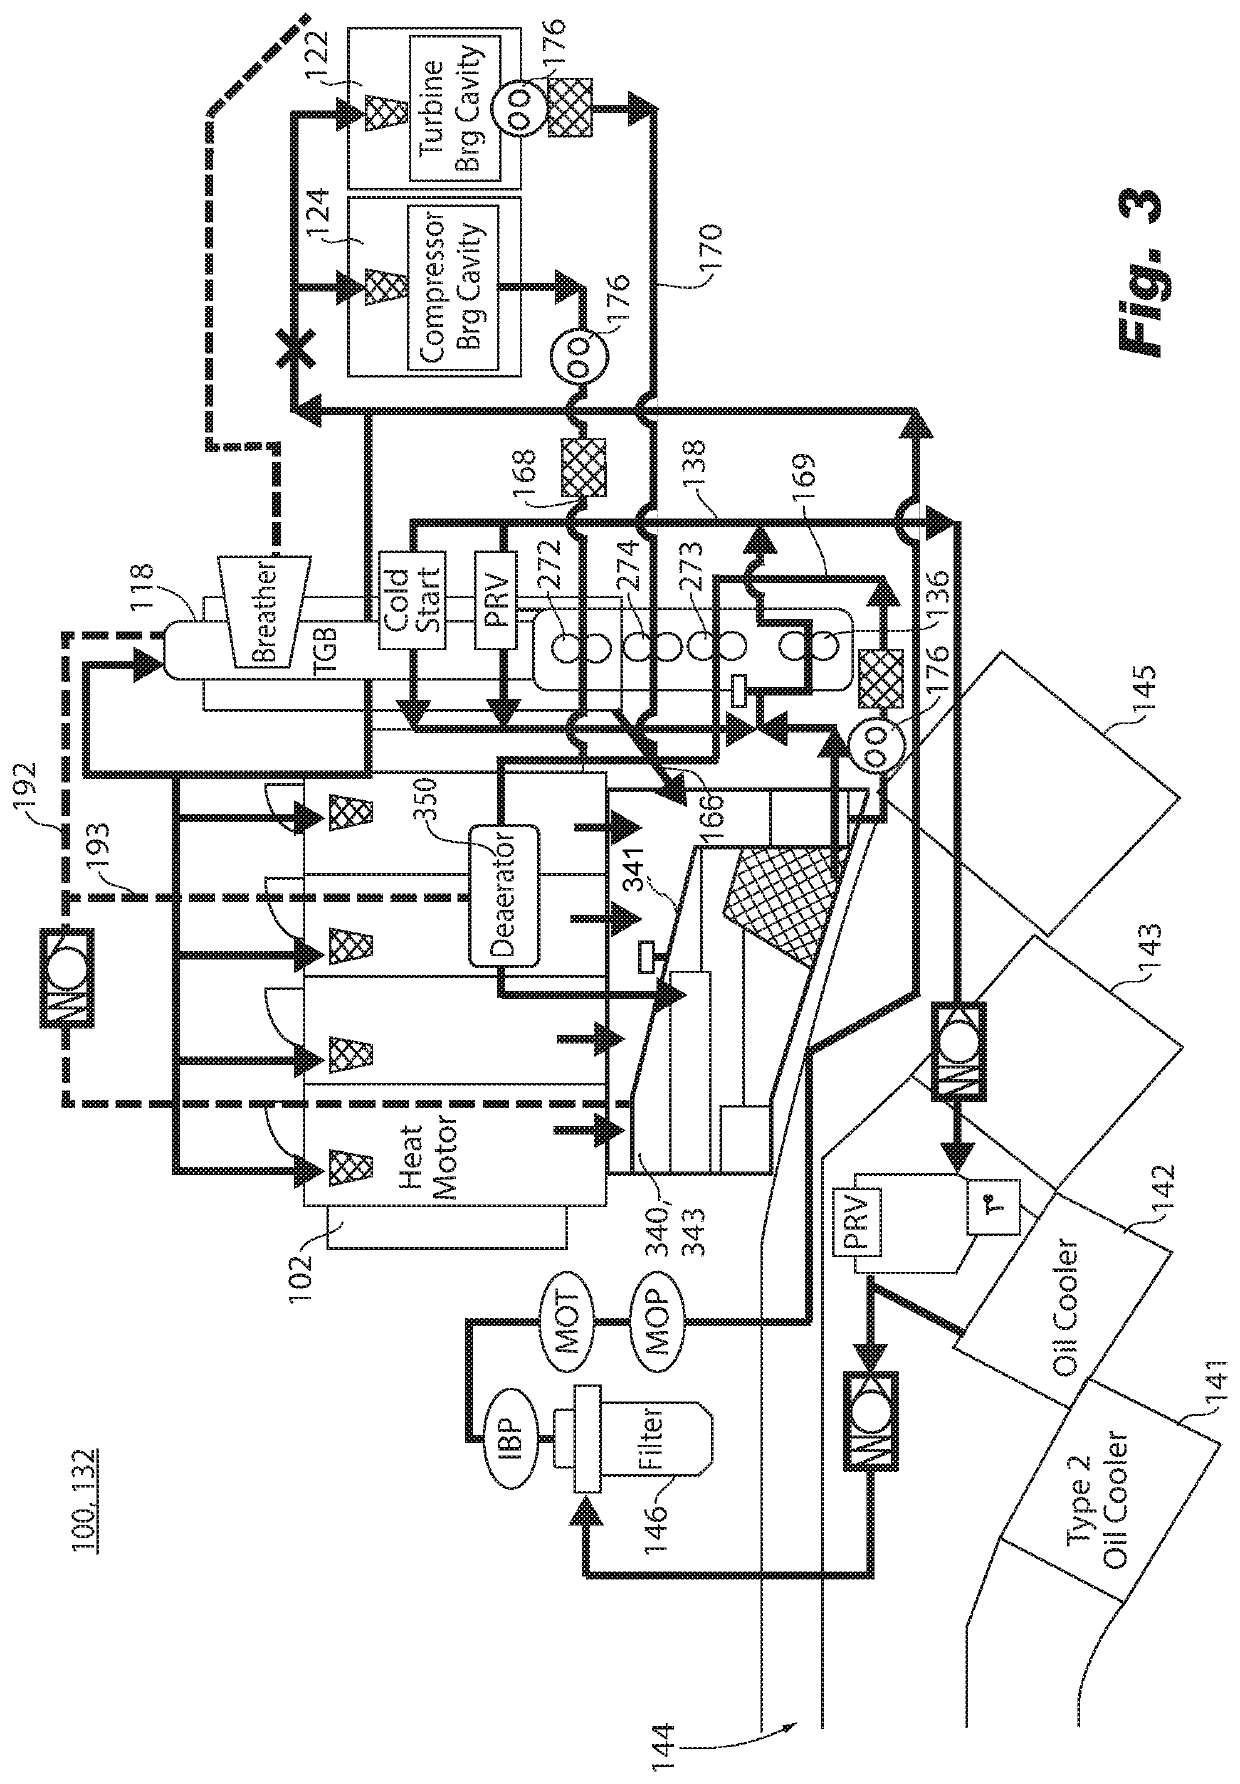 Circulating coolant fluid in hybrid electrical propulsion systems